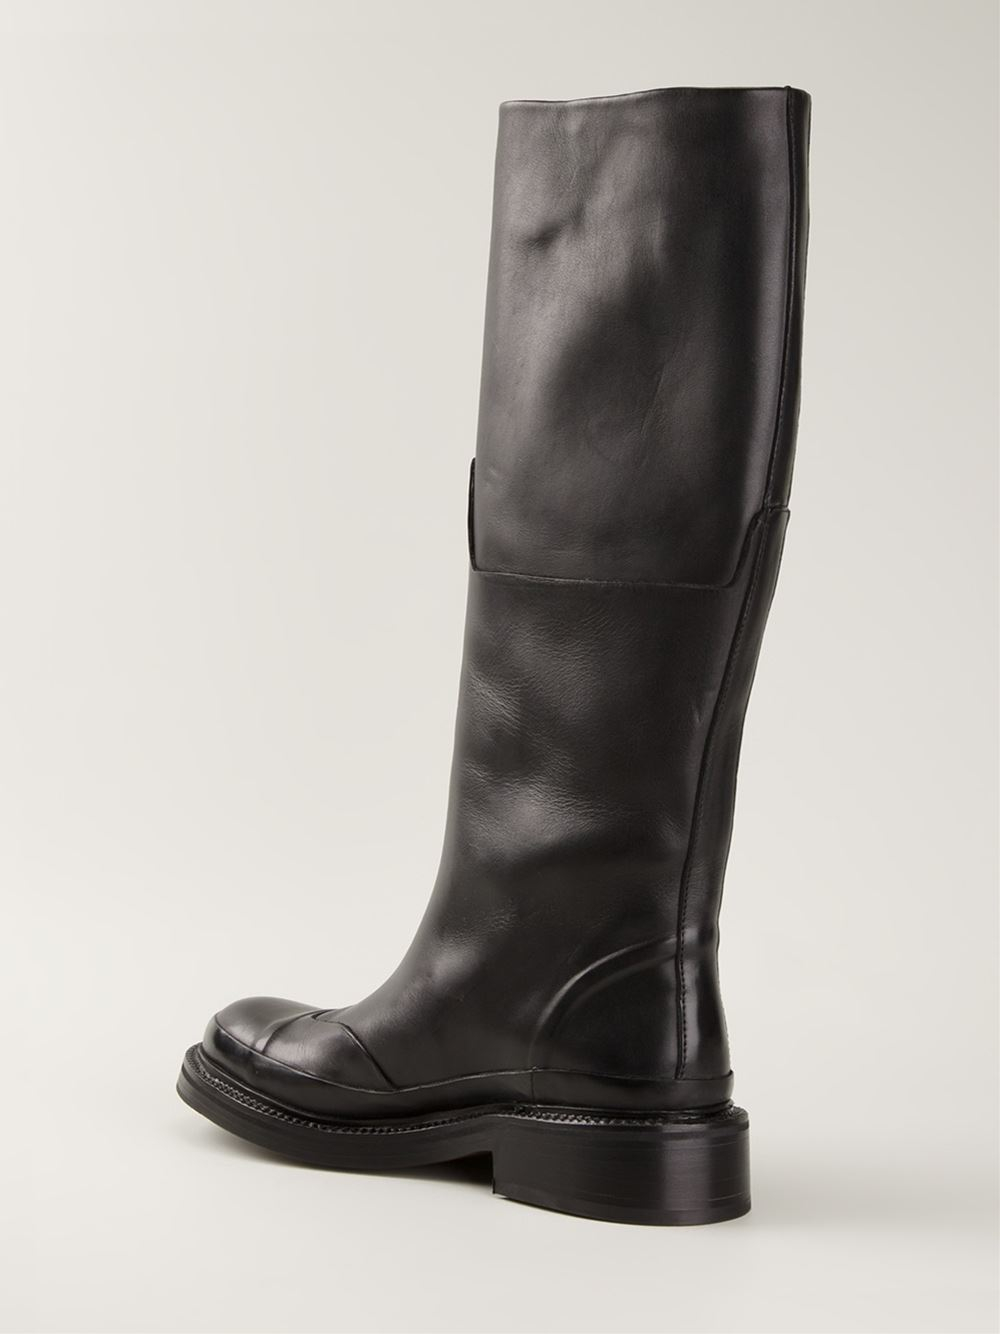 Agnona Chunky Knee High Boots in Black - Lyst